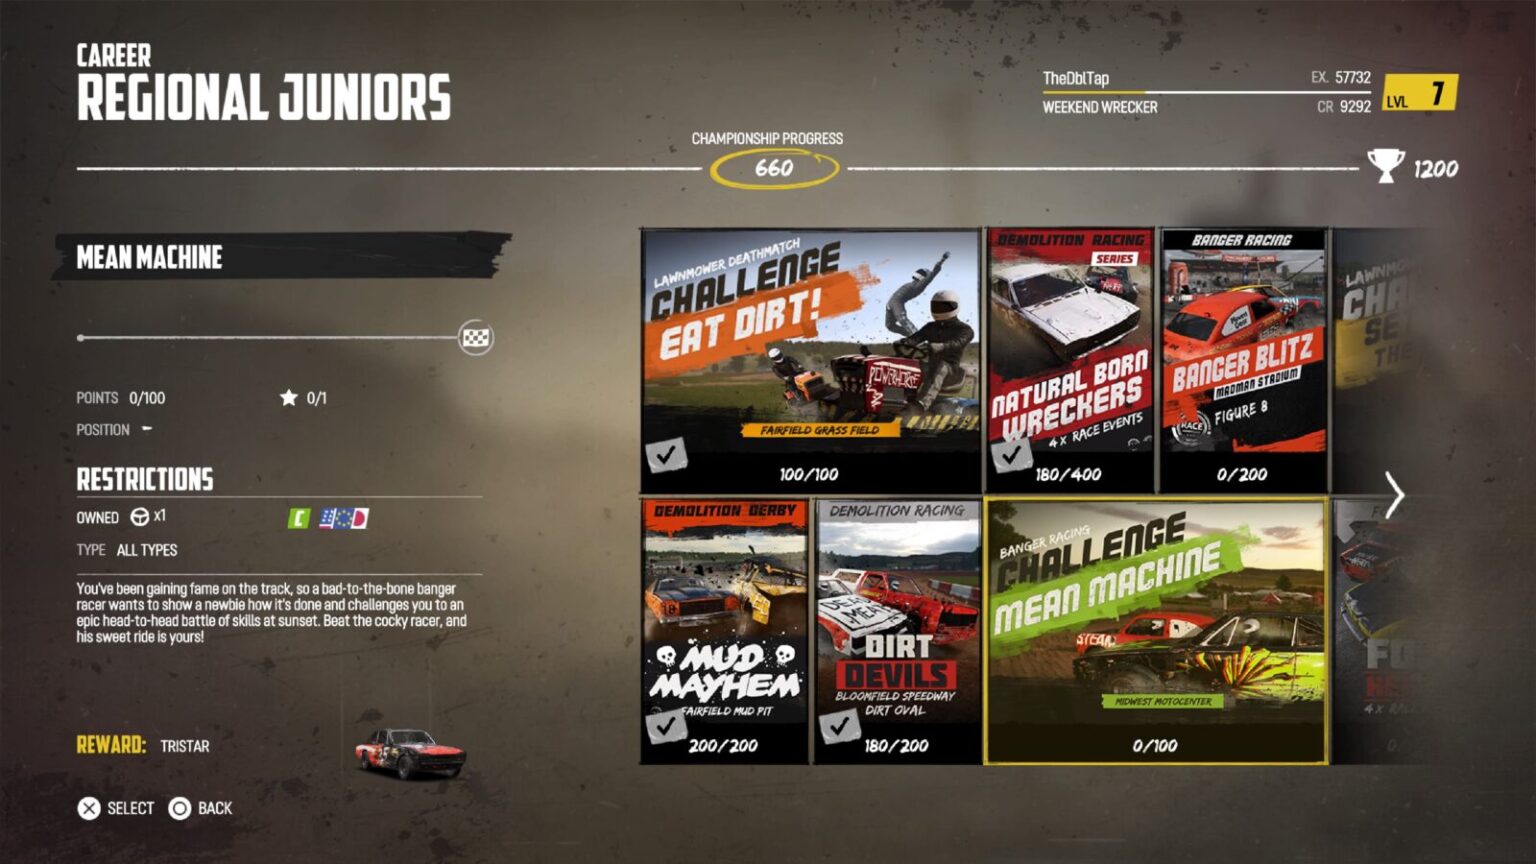 dirt 5 ps4 trophy guide